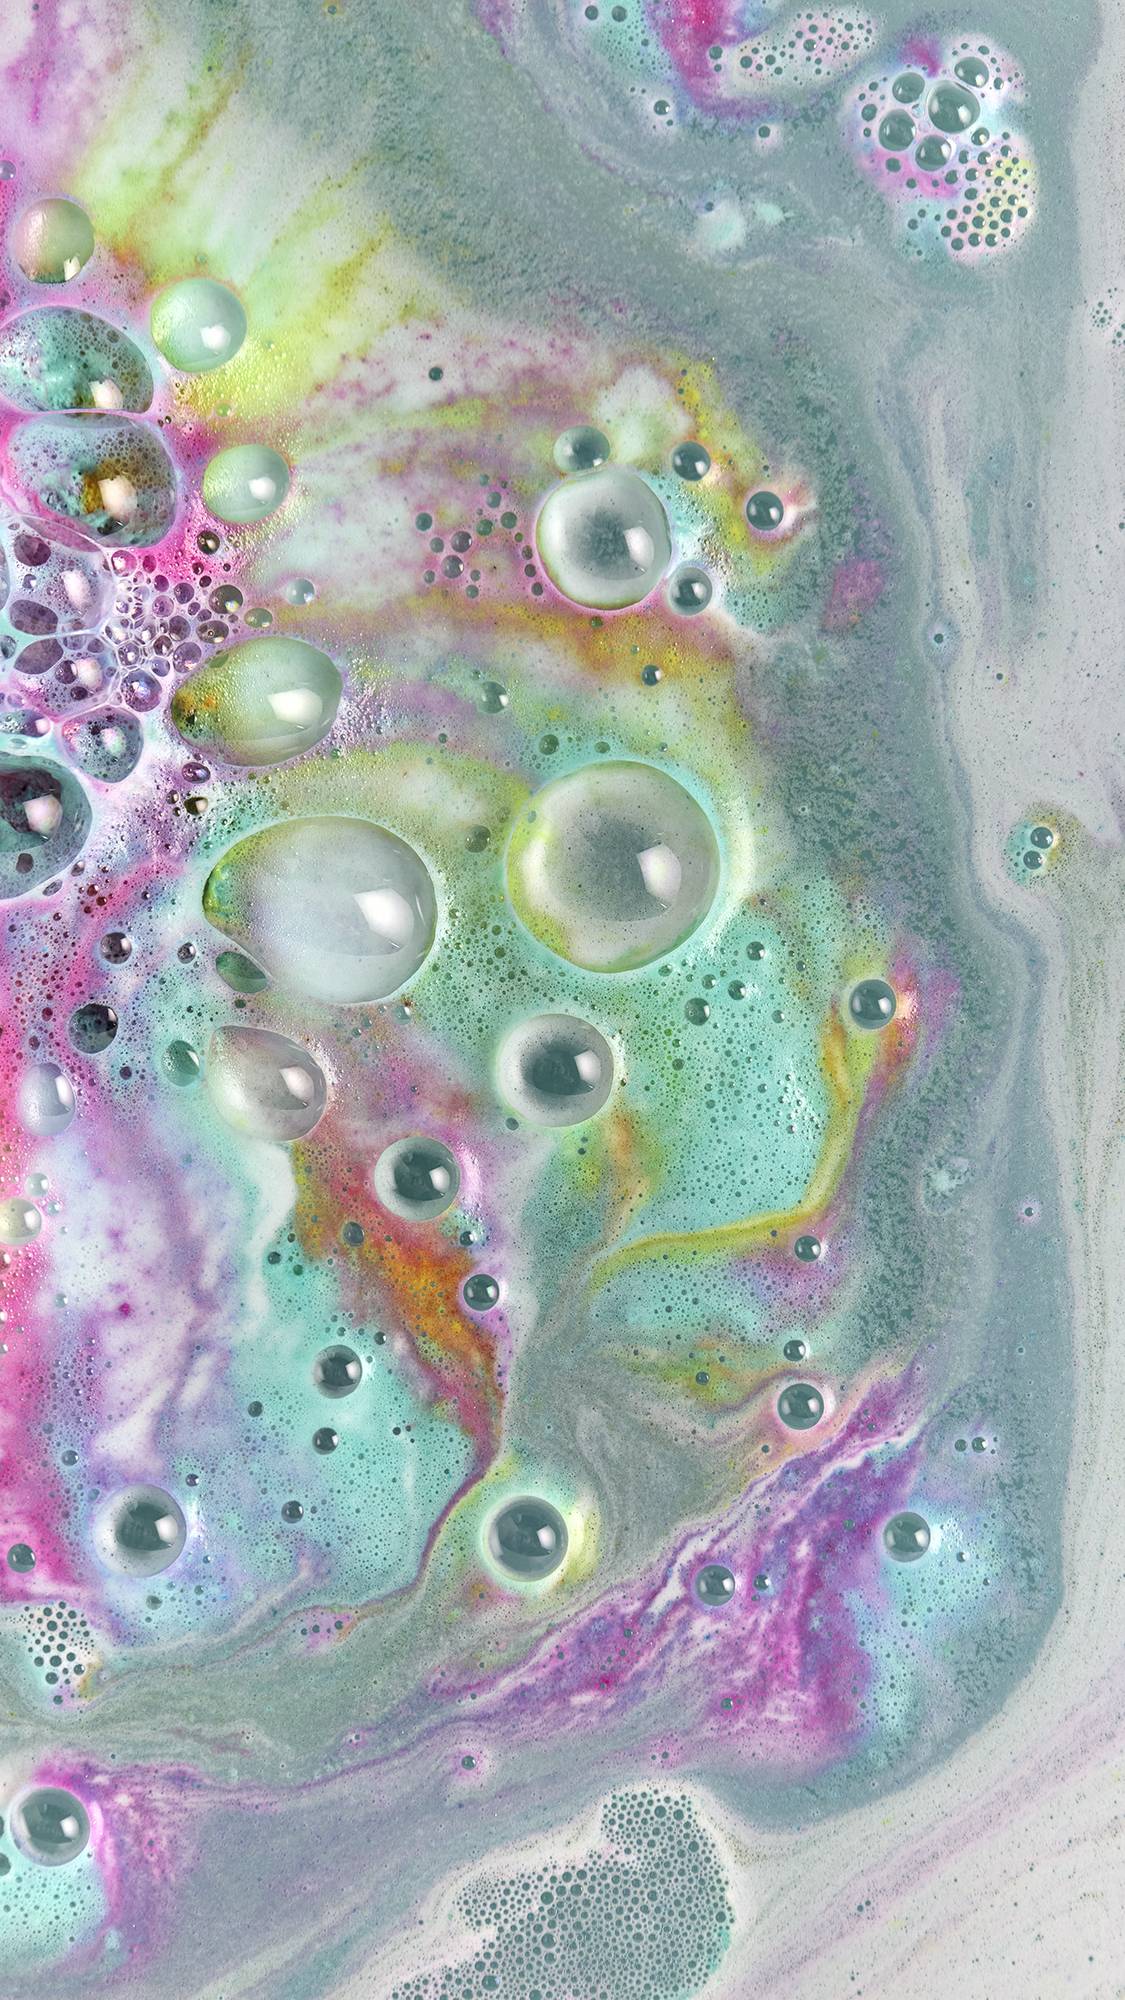 The bath bomb has fully dissolved leaving a swirling galaxy of blue, pink, yellow, green, purple and red.